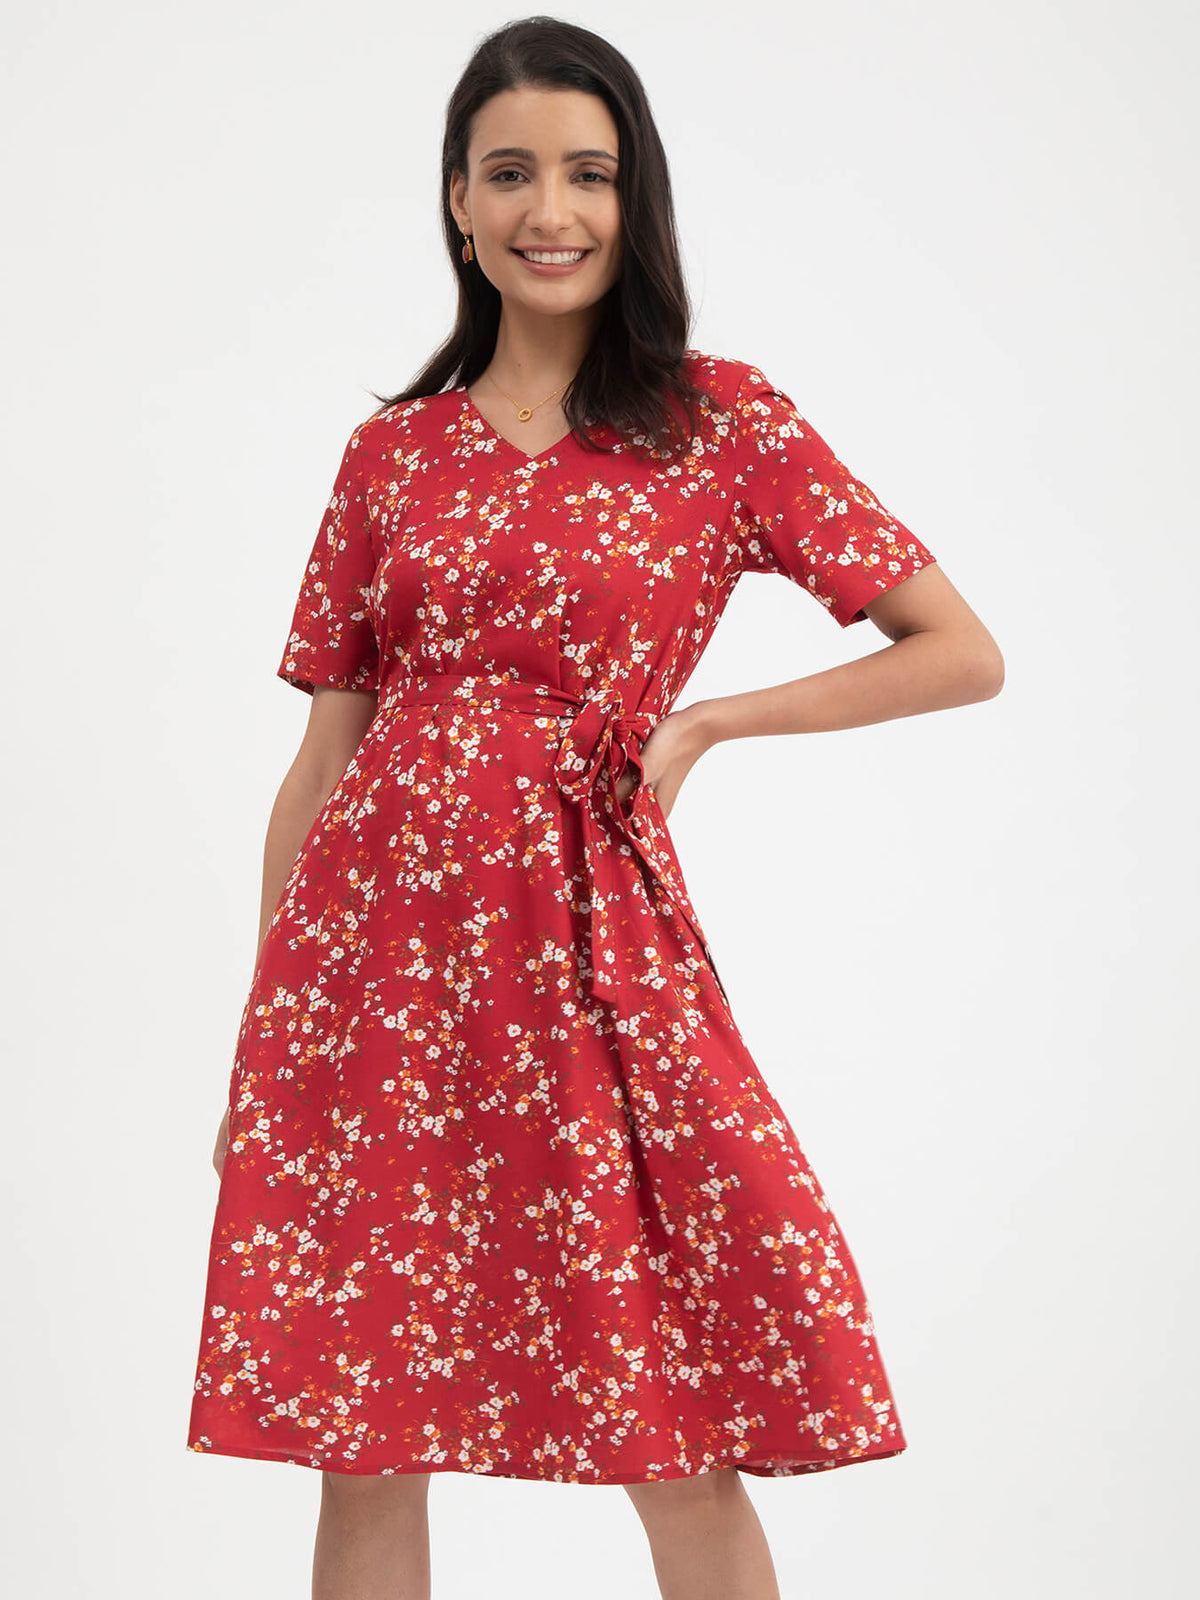 Floral Print Flared Dress - Red